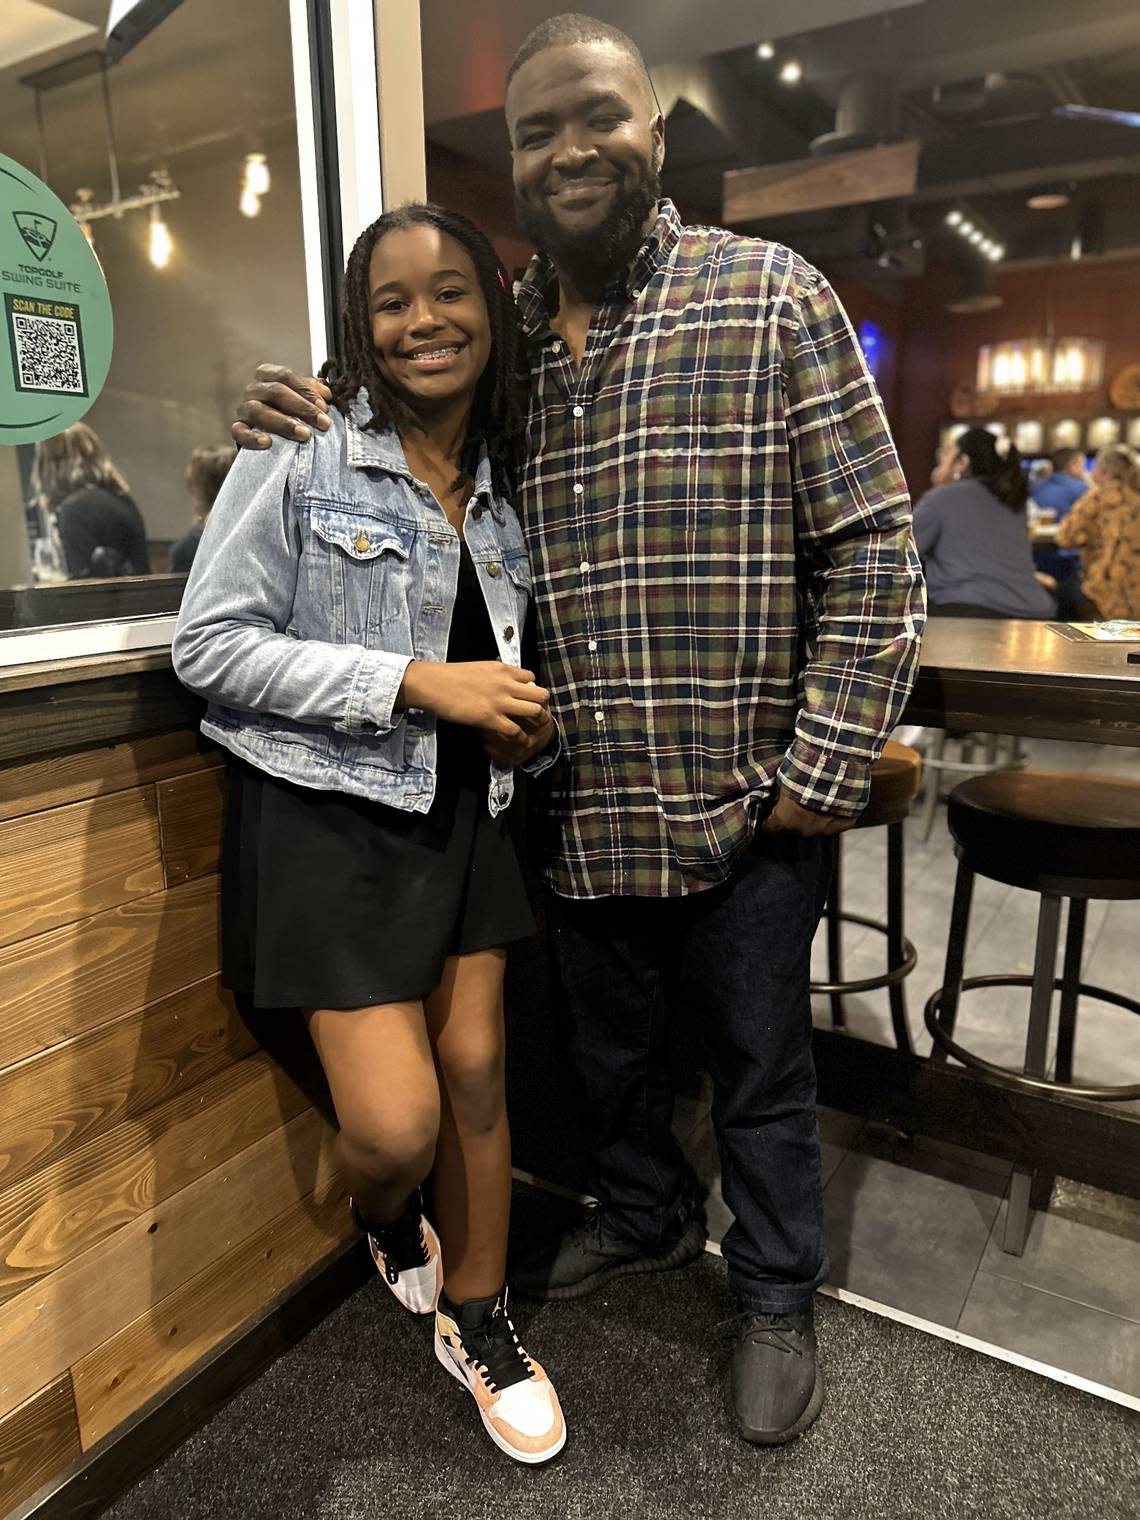 Symaria Glenn, left, with her dad Shawn Glenn. The 13-year-old girl died from a brain bleed in February 2024. To keep her memory alive, Symaria’s family made her an organ donor. She donated six organs and has helped save five lives, including her dad, who needed a new kidney.